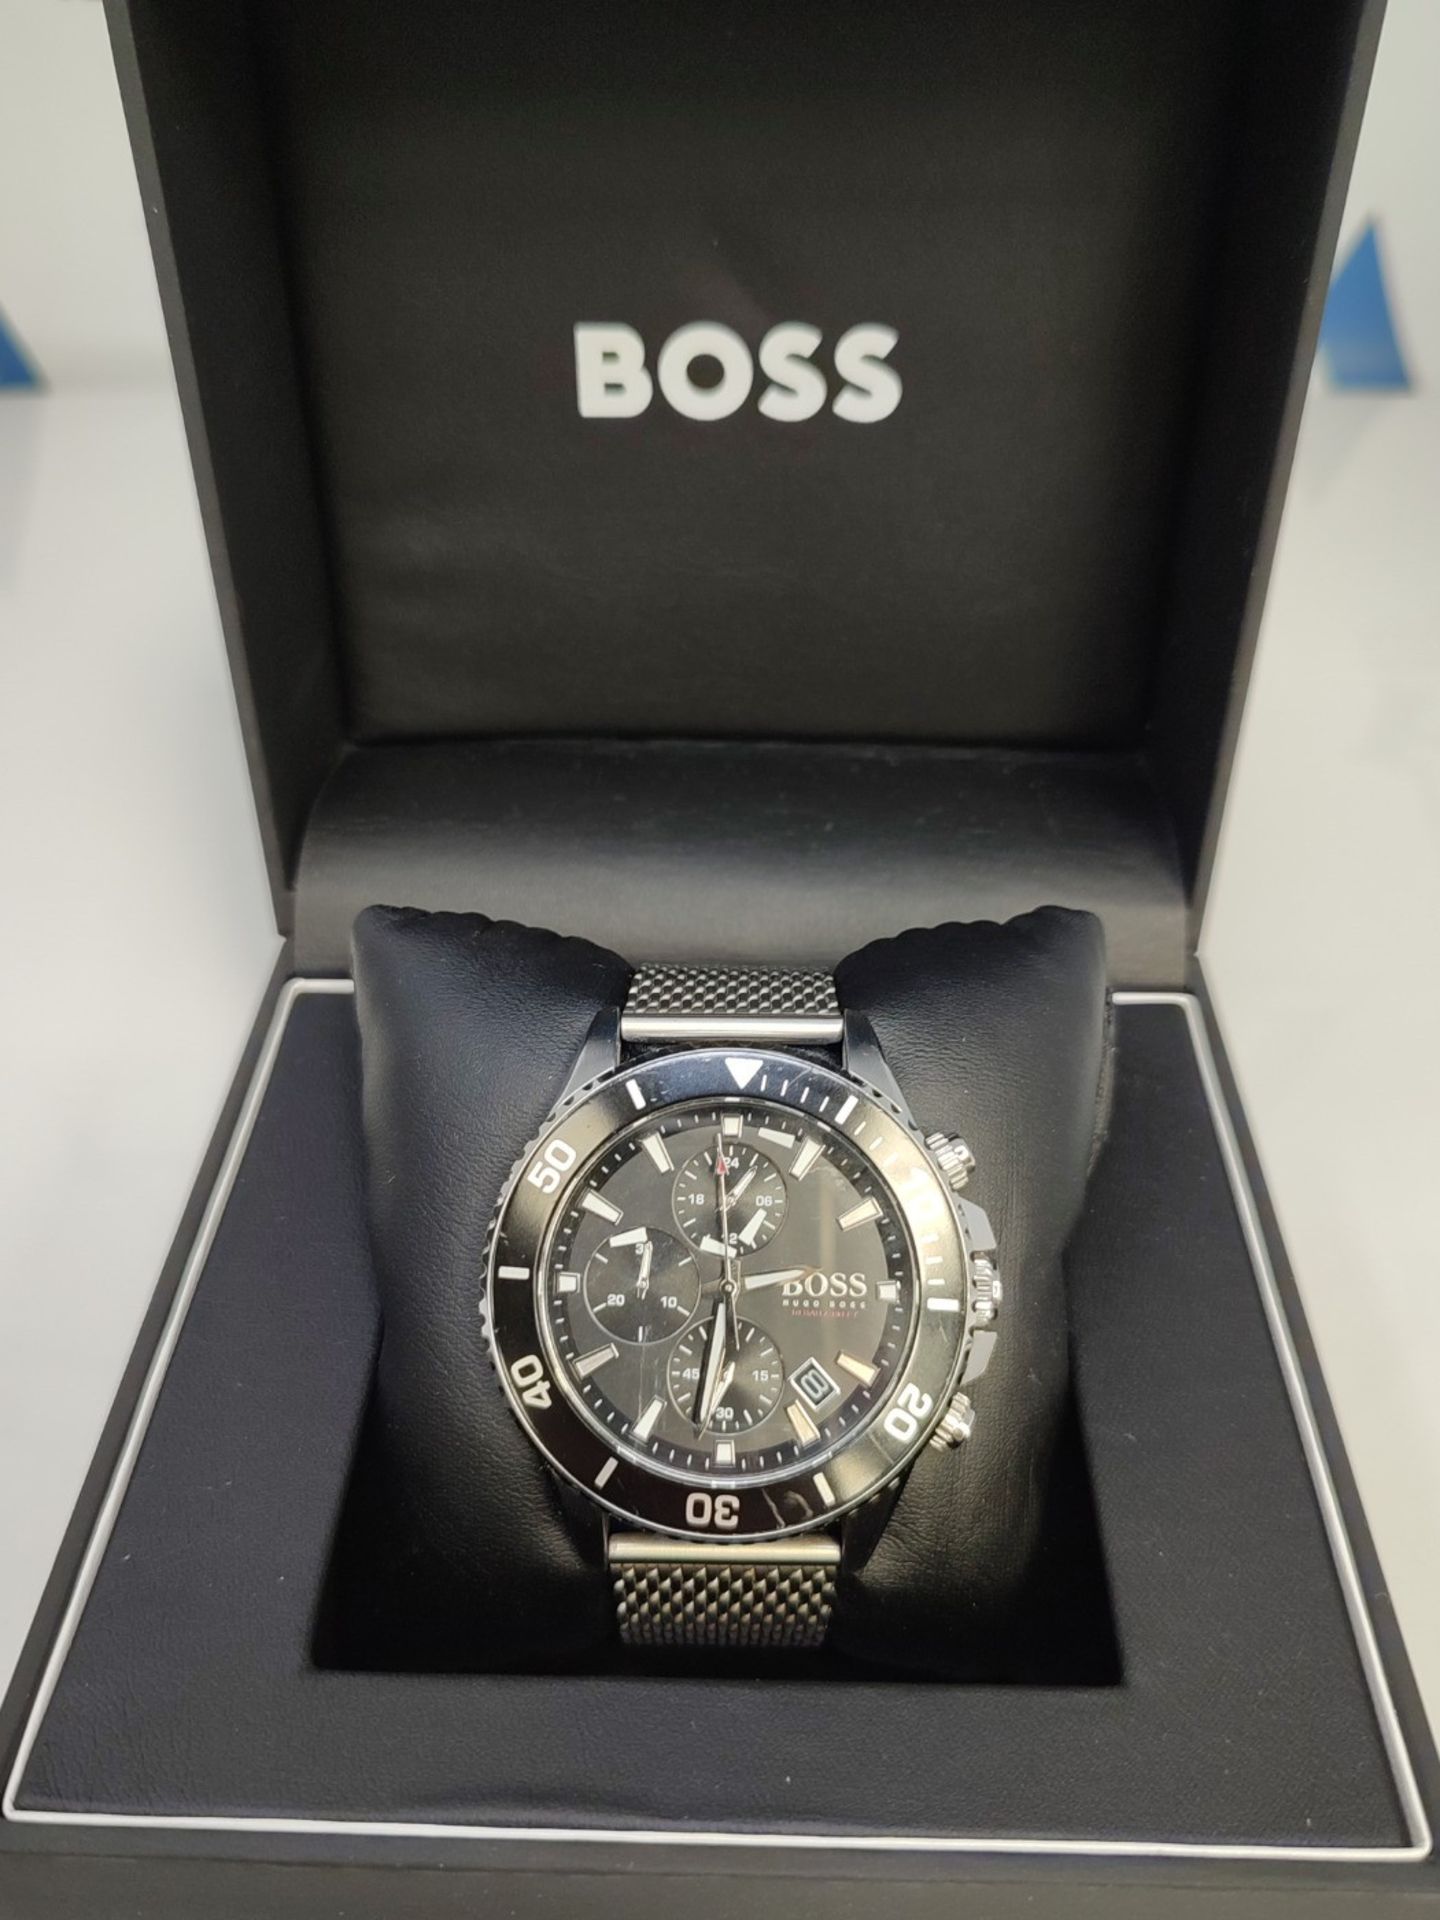 RRP £268.00 BOSS Chronograph Quartz Watch for Men with Silver Stainless Steel Mesh Bracelet - 1513 - Image 2 of 3